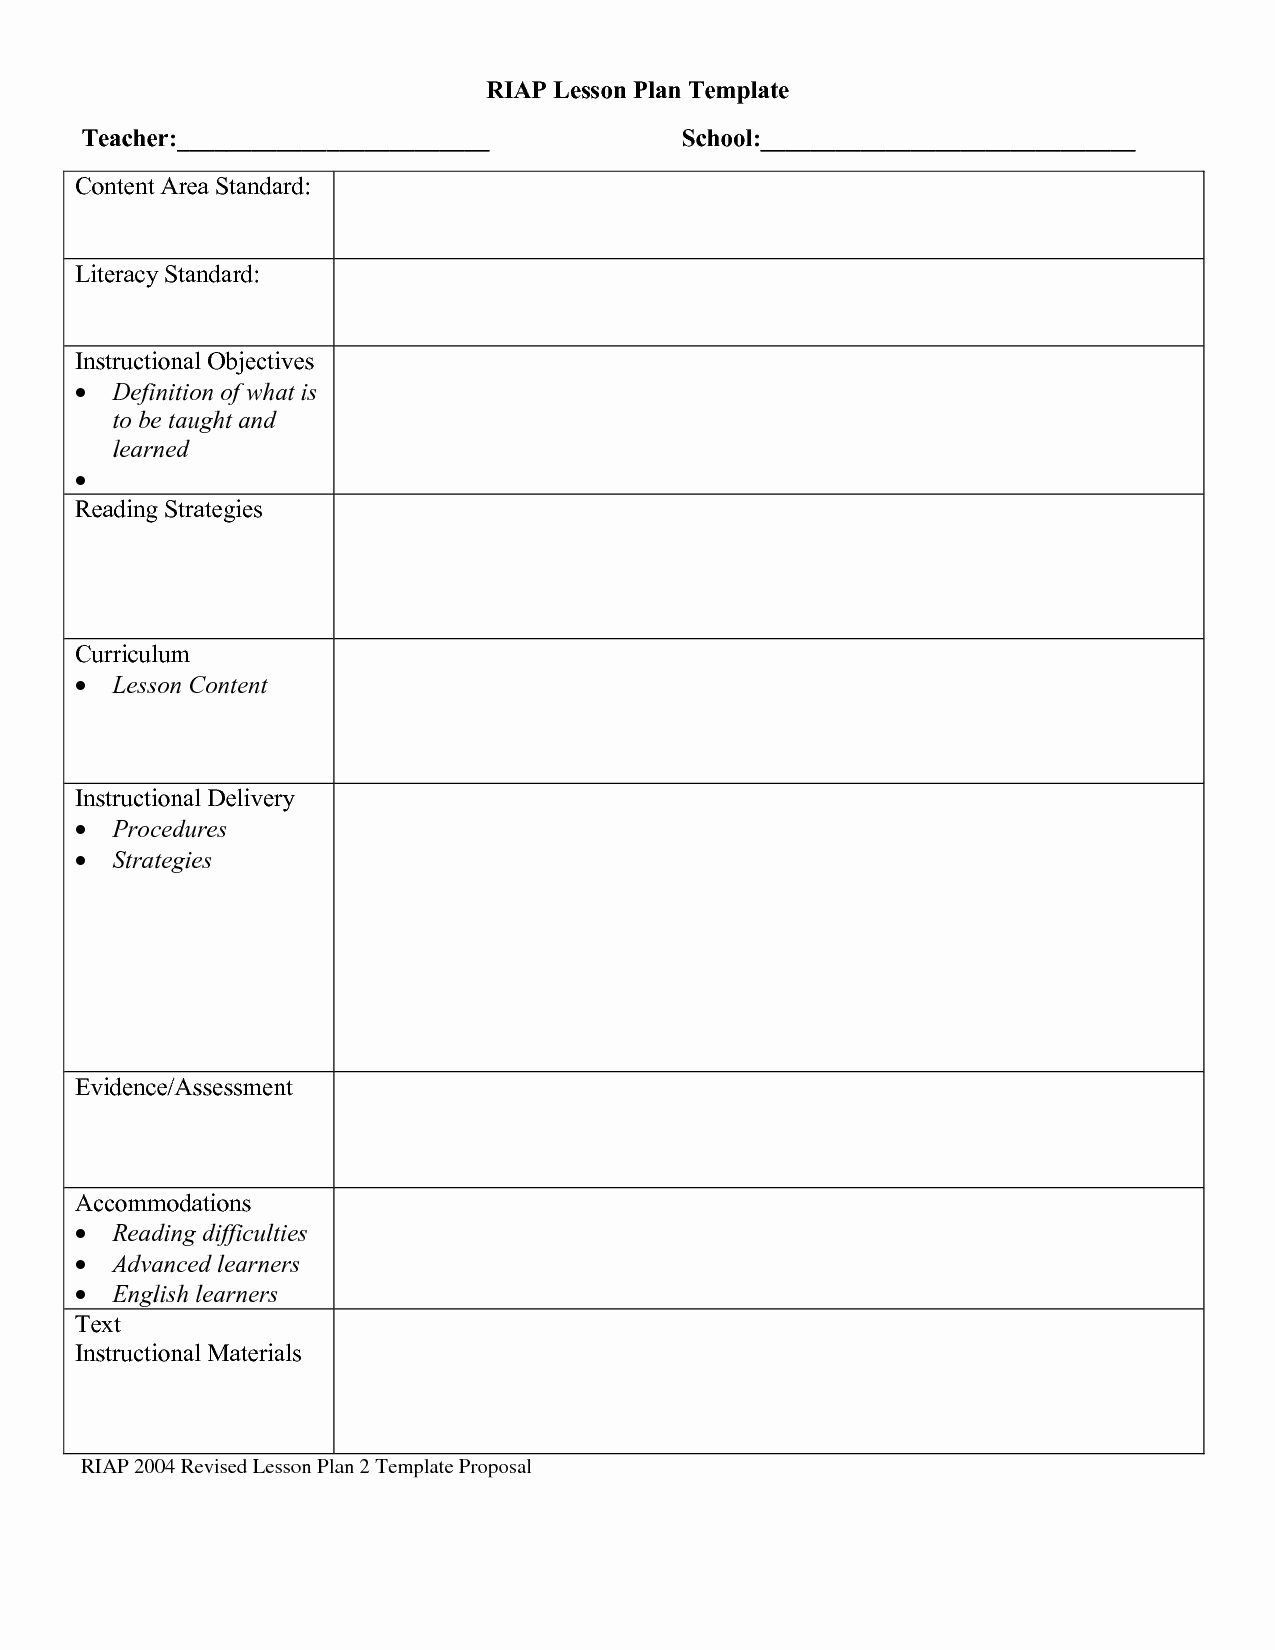 Free Lesson Plan Template Elementary Awesome Free Lesson Plan Templates for Middle School